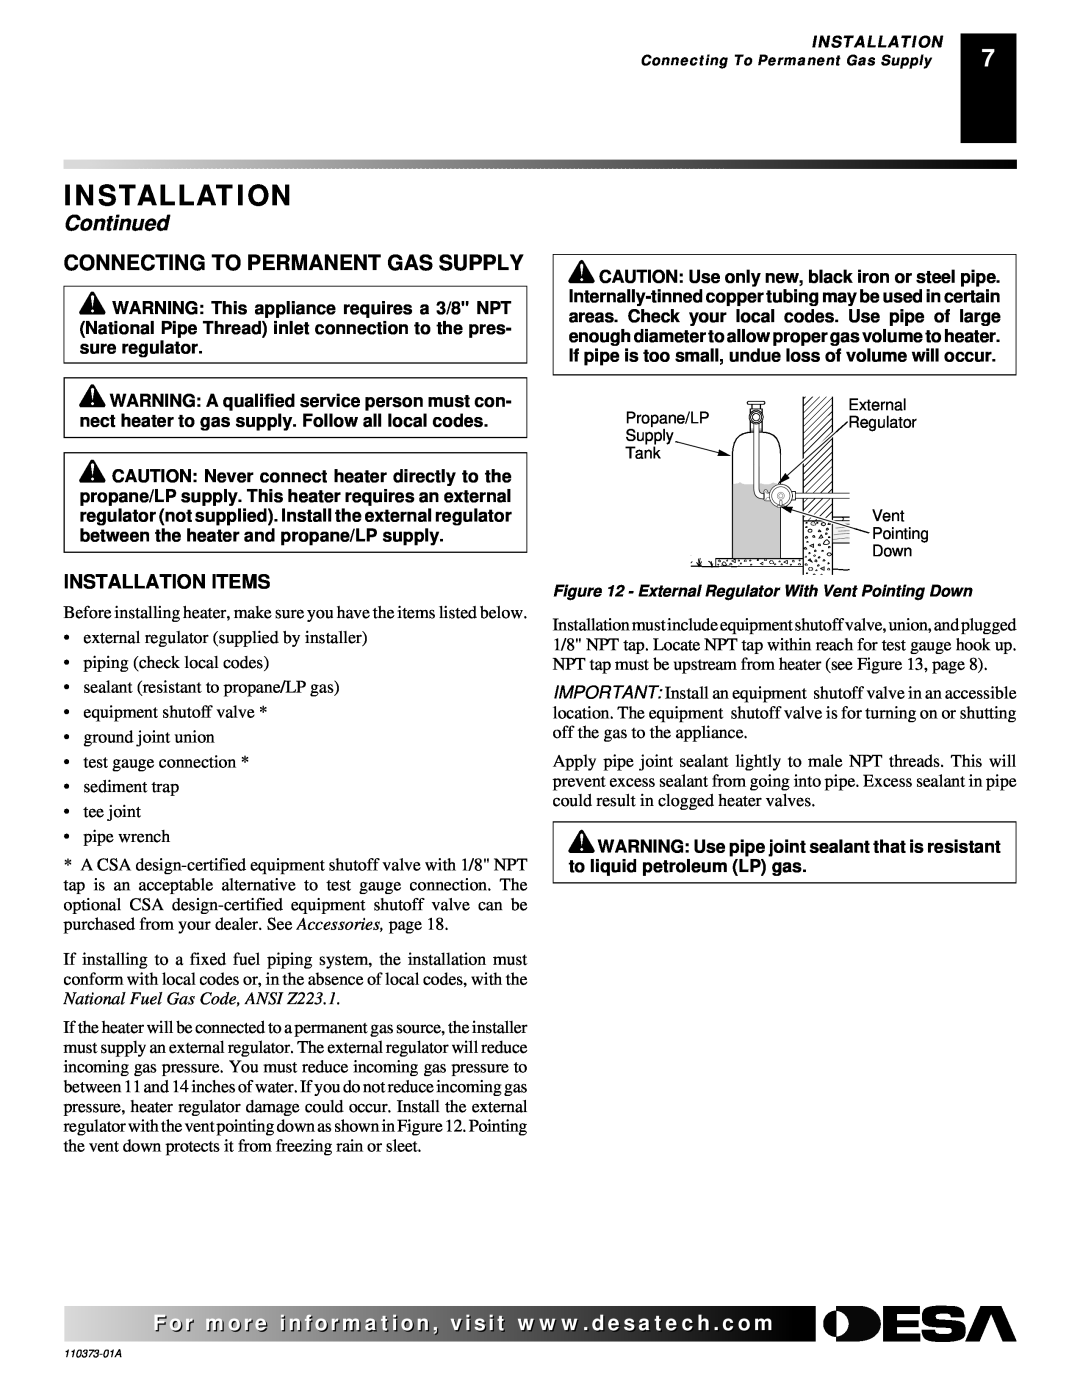 Desa REM10PT installation manual Continued, Connecting To Permanent Gas Supply, Installation Items 